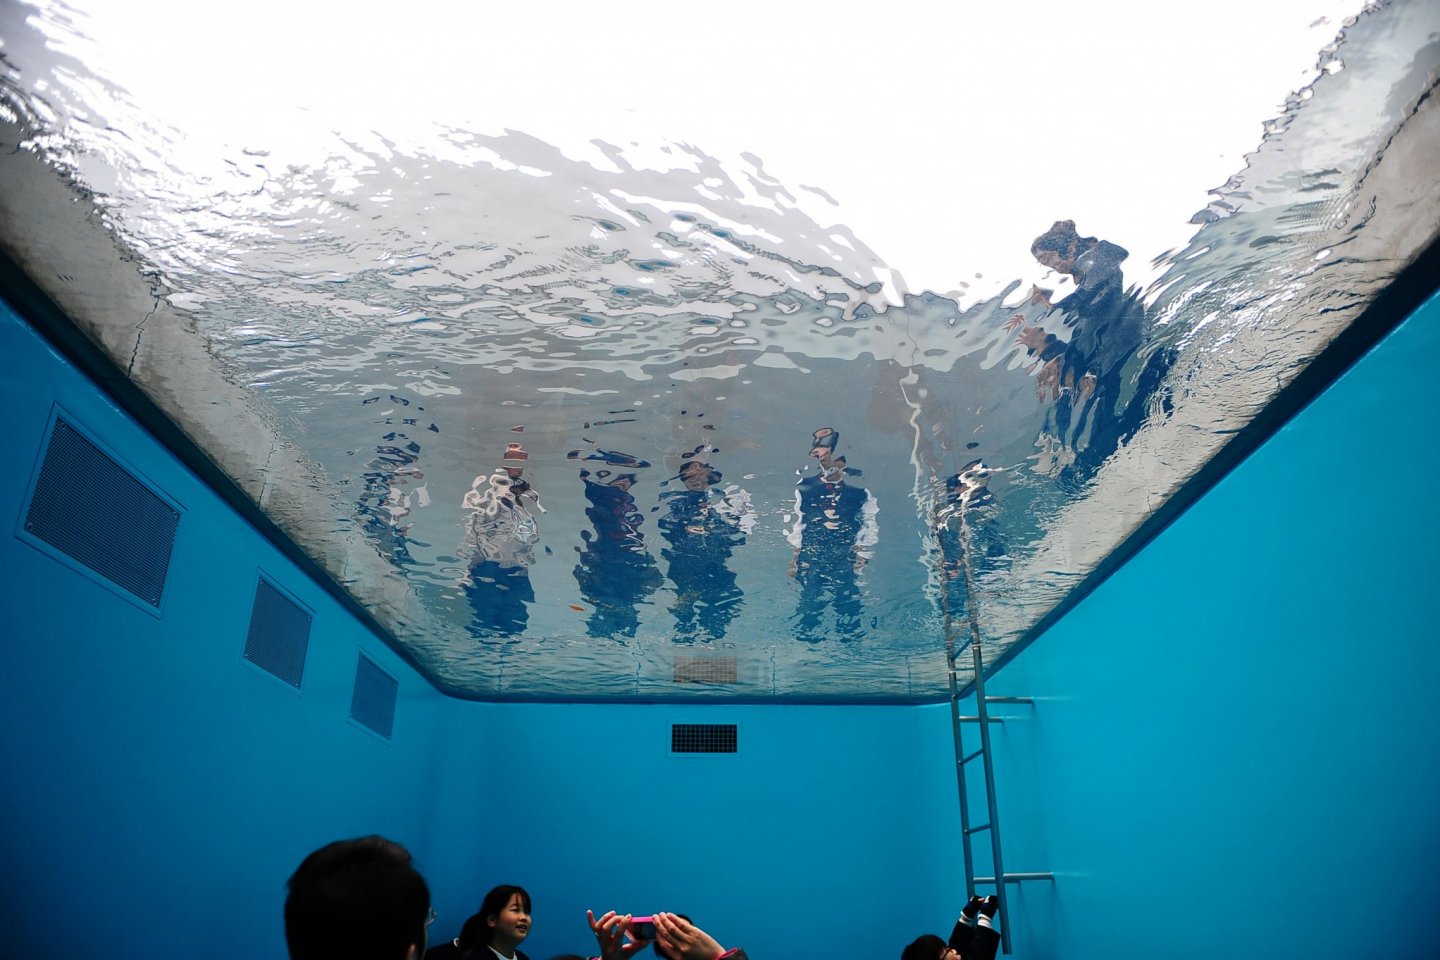 The Swimming Pool, view from below